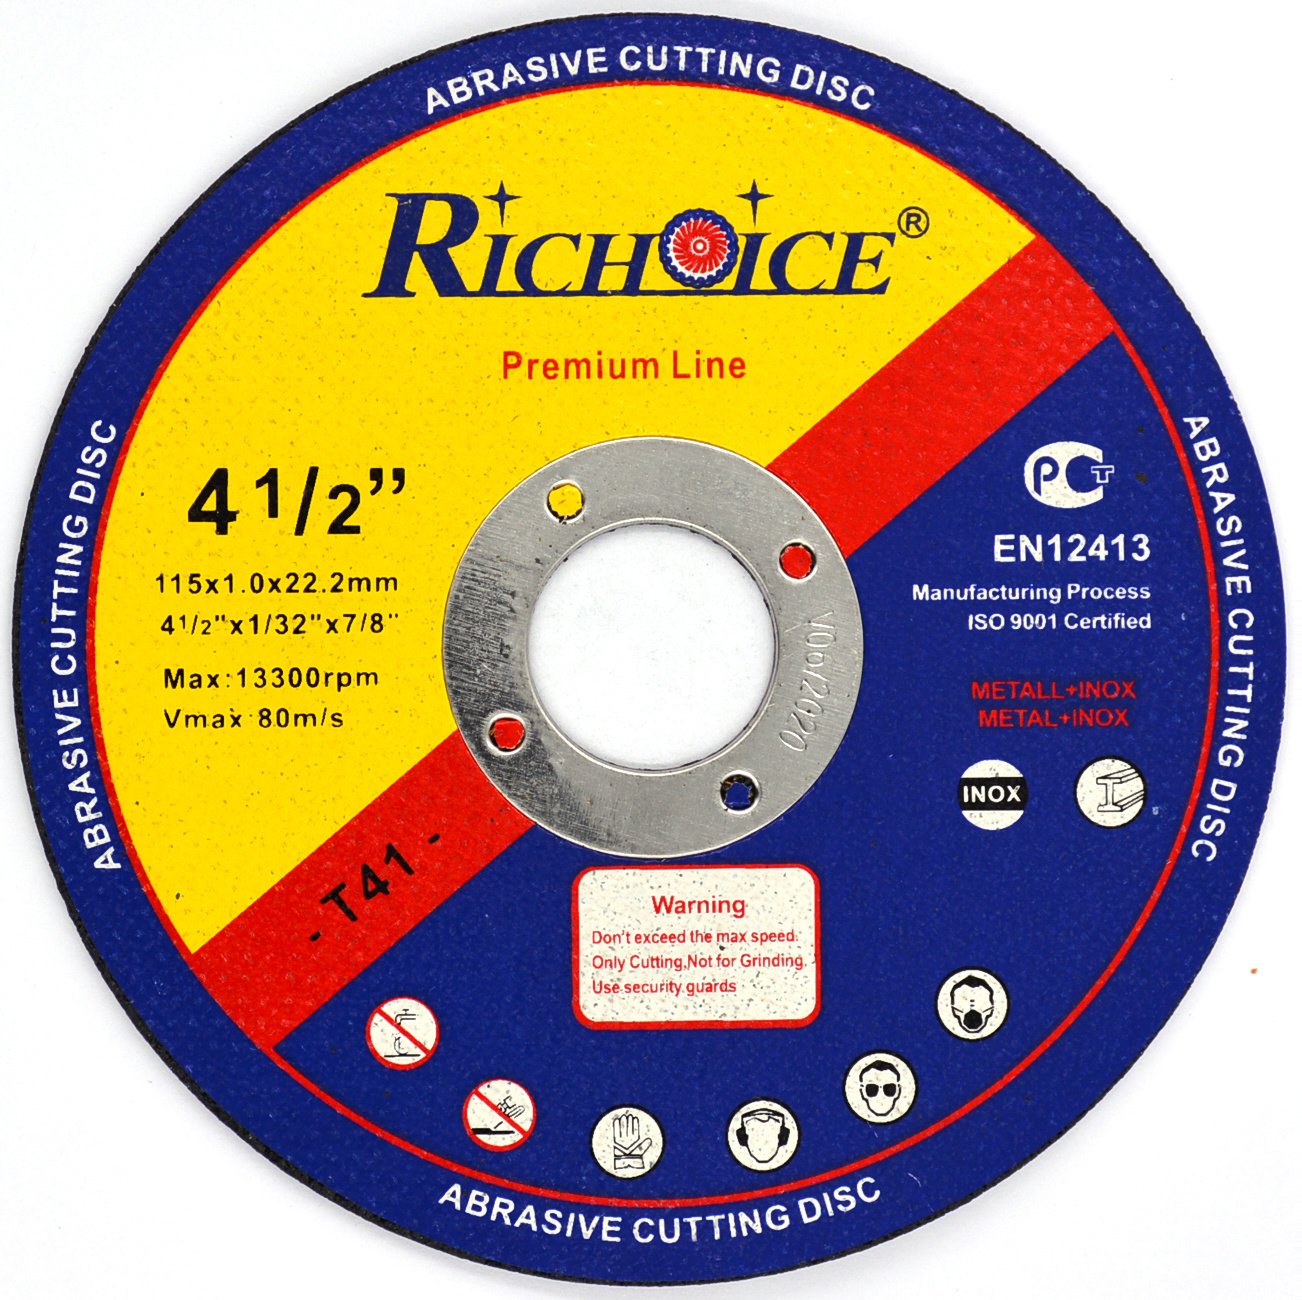 Richoice Abrasive Cutting Disc for metal